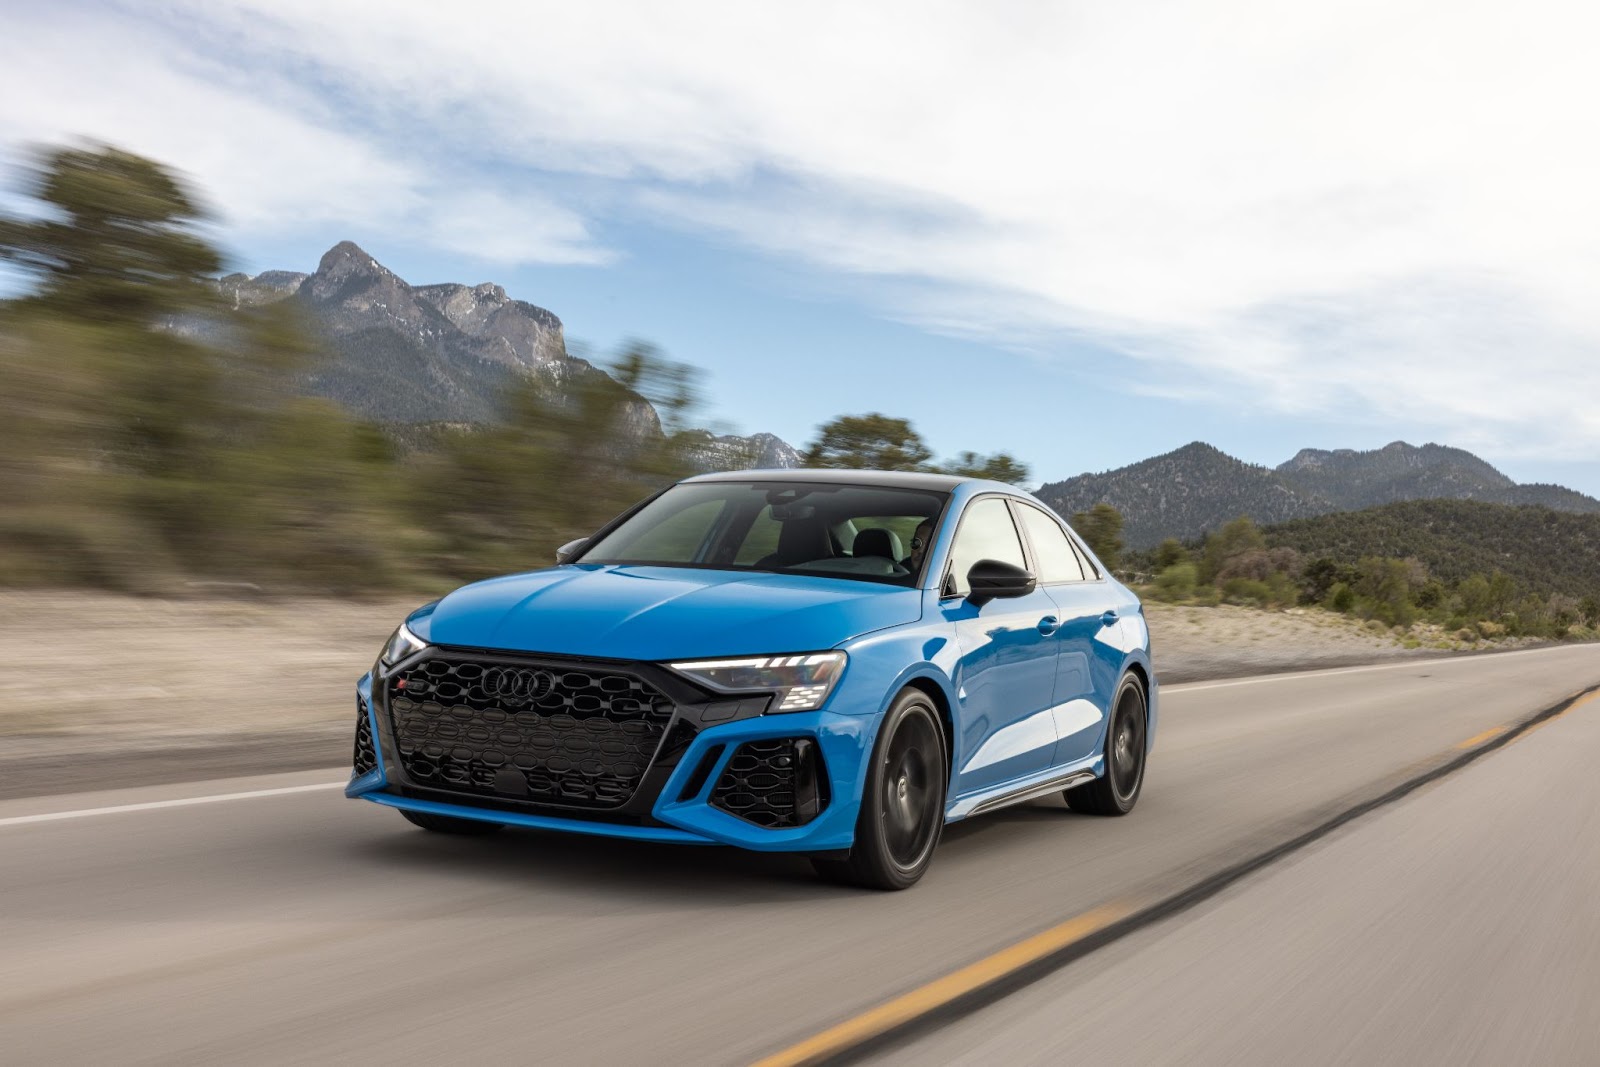 The 2023 Audi RS 3 on a desert road